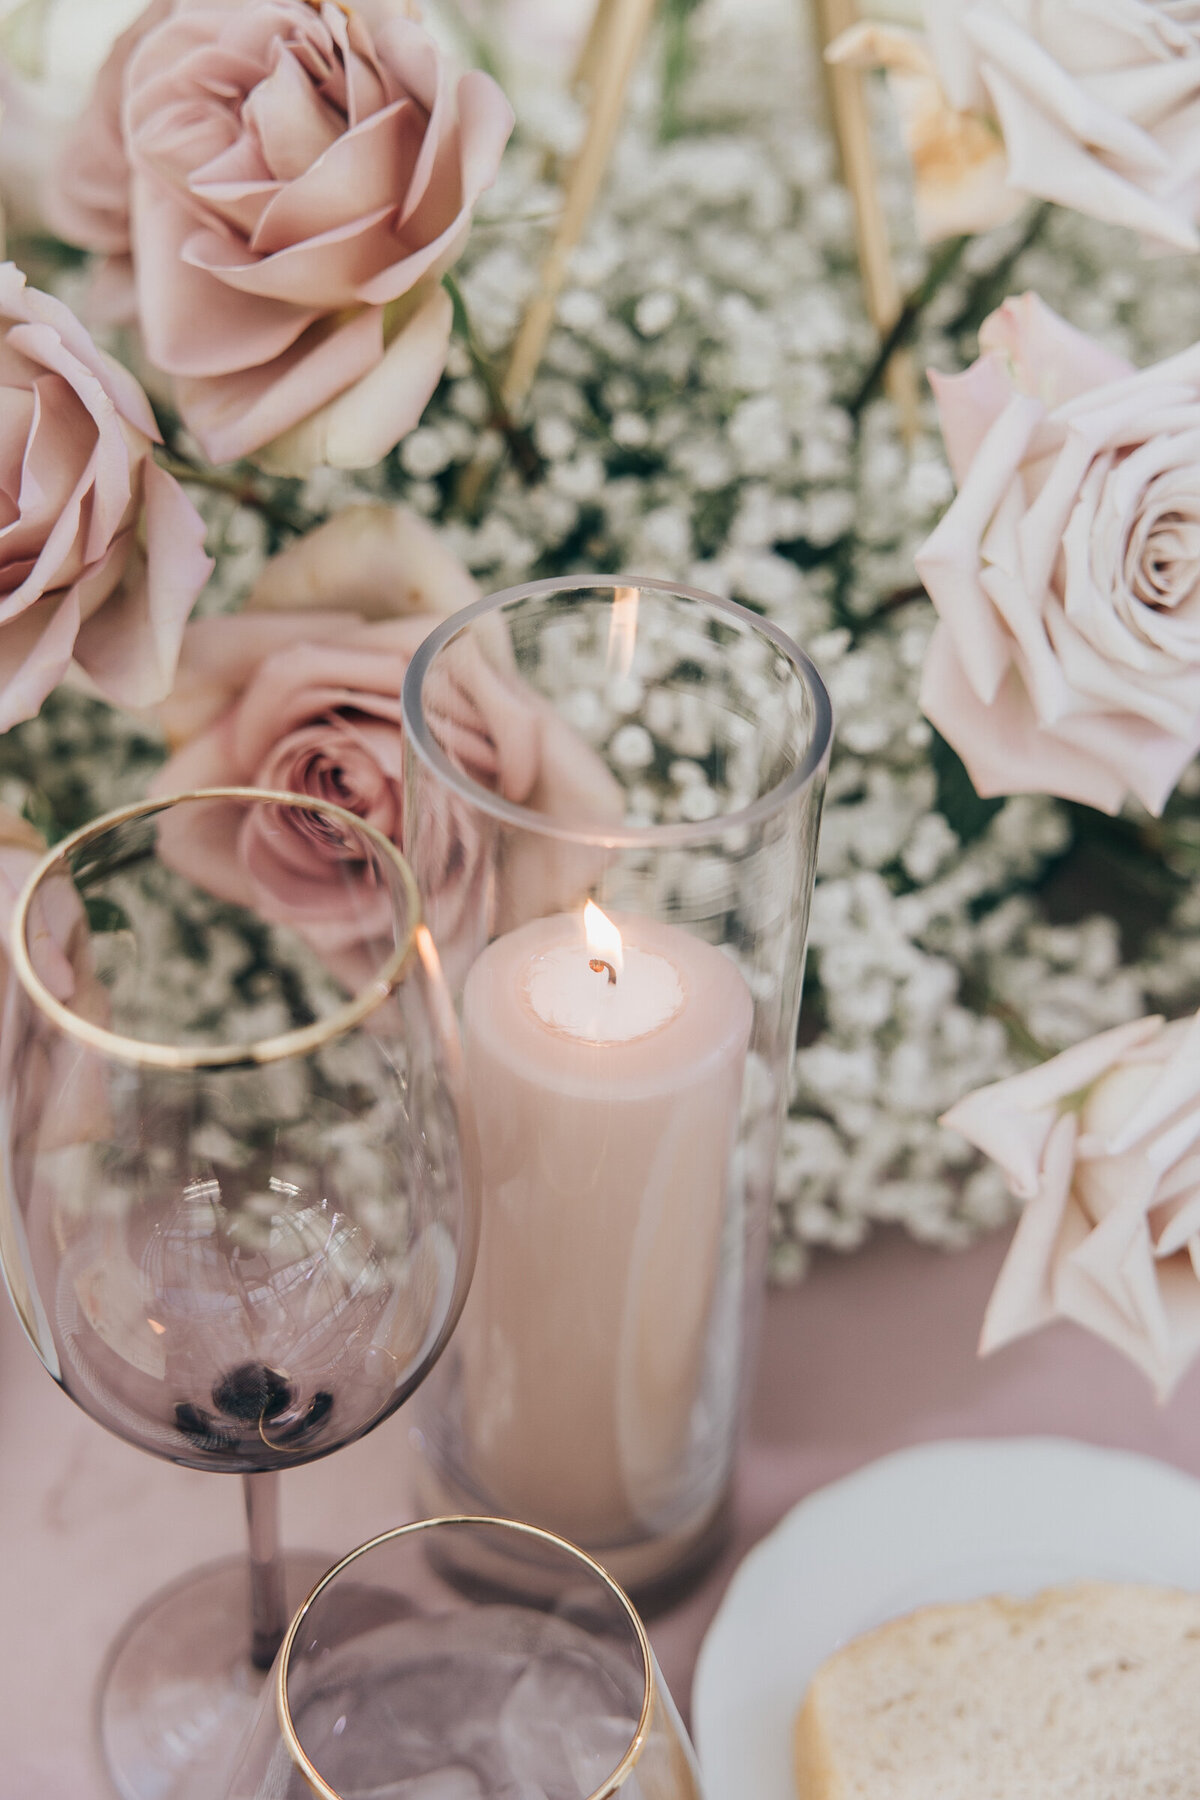 Lavender candle wedding centrepiece for luxurious wedding